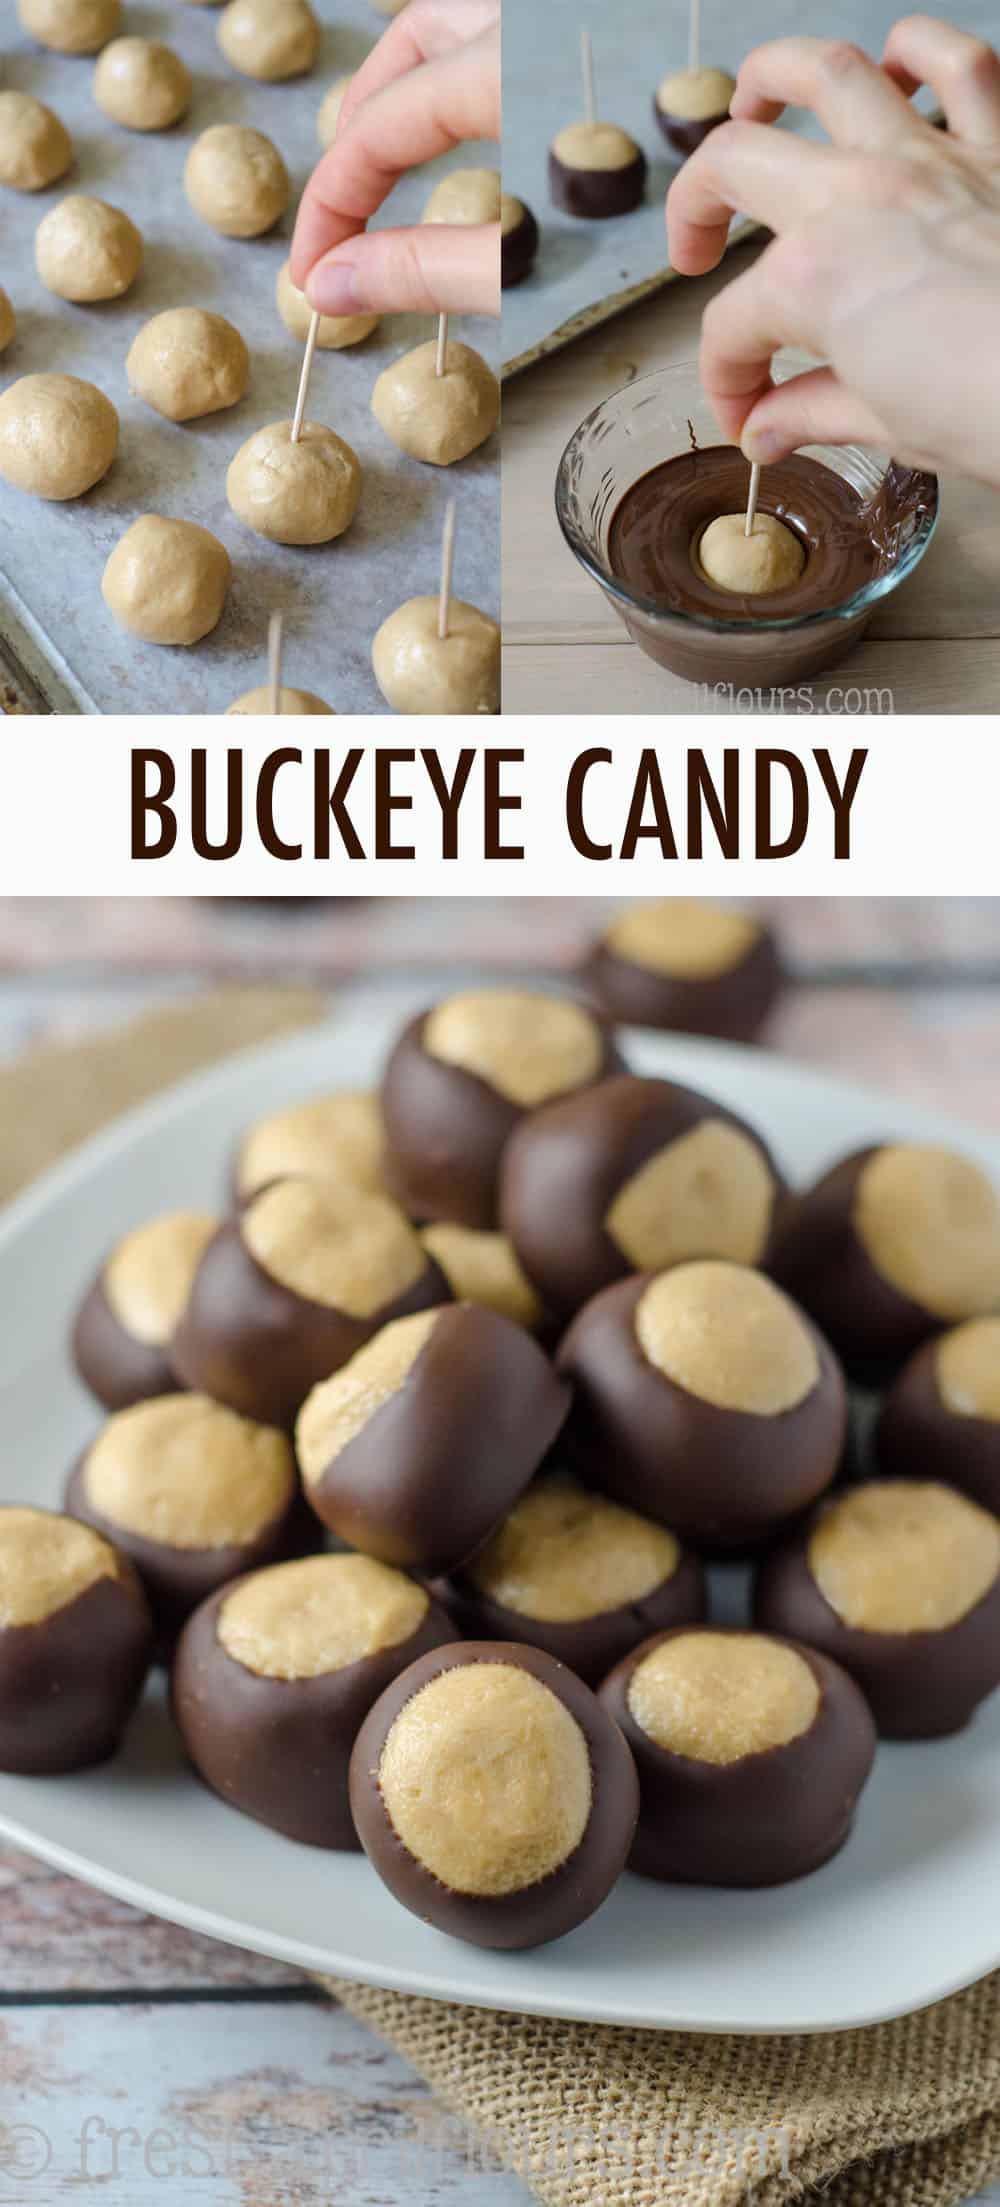 Easy, melt-in-your-mouth peanut butter buckeye balls dipped in chocolate. A classic! via @frshaprilflours